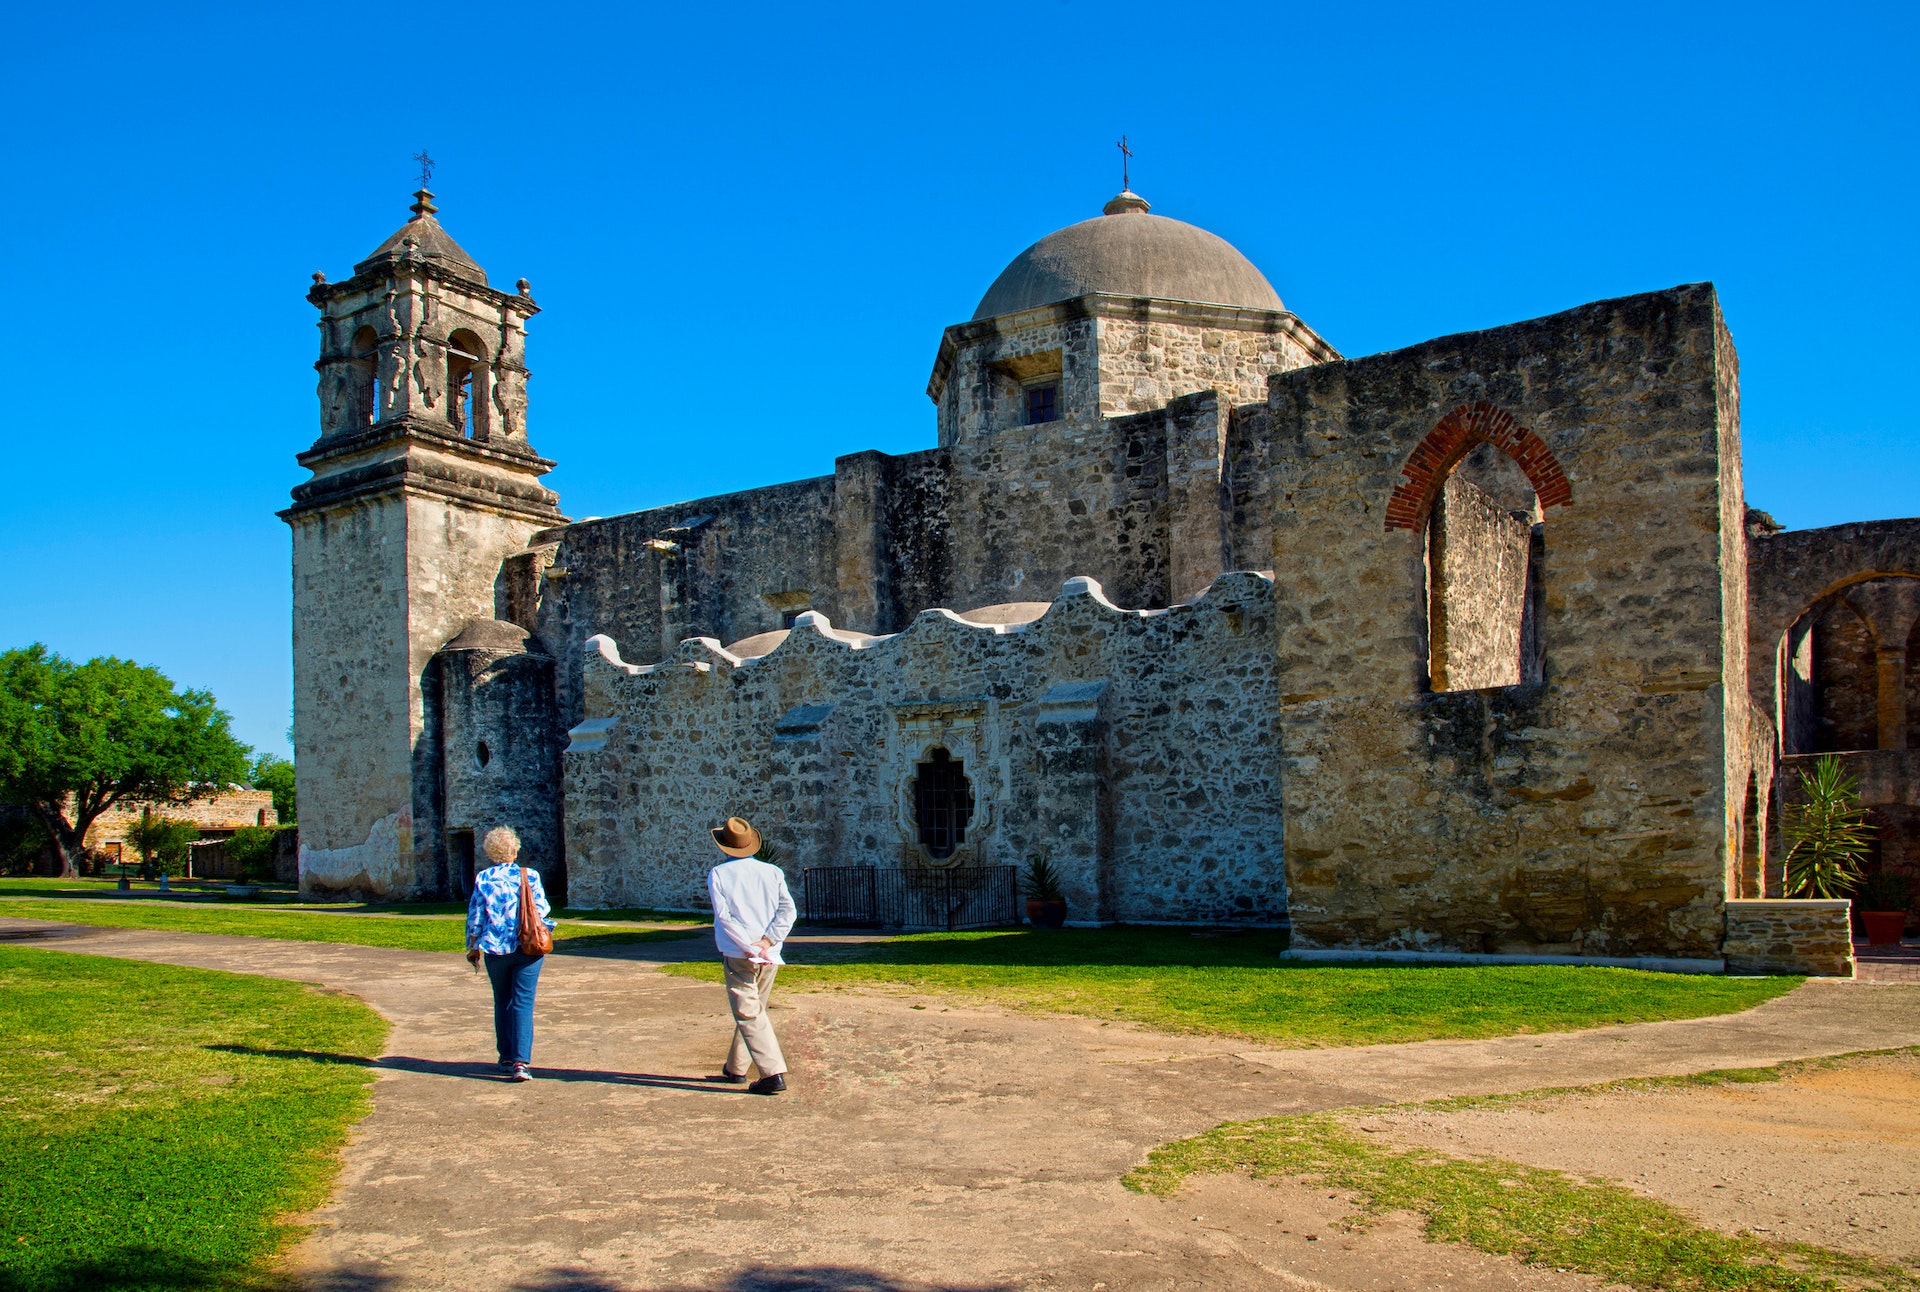 Two people walk on the grass in front of a historic religious building